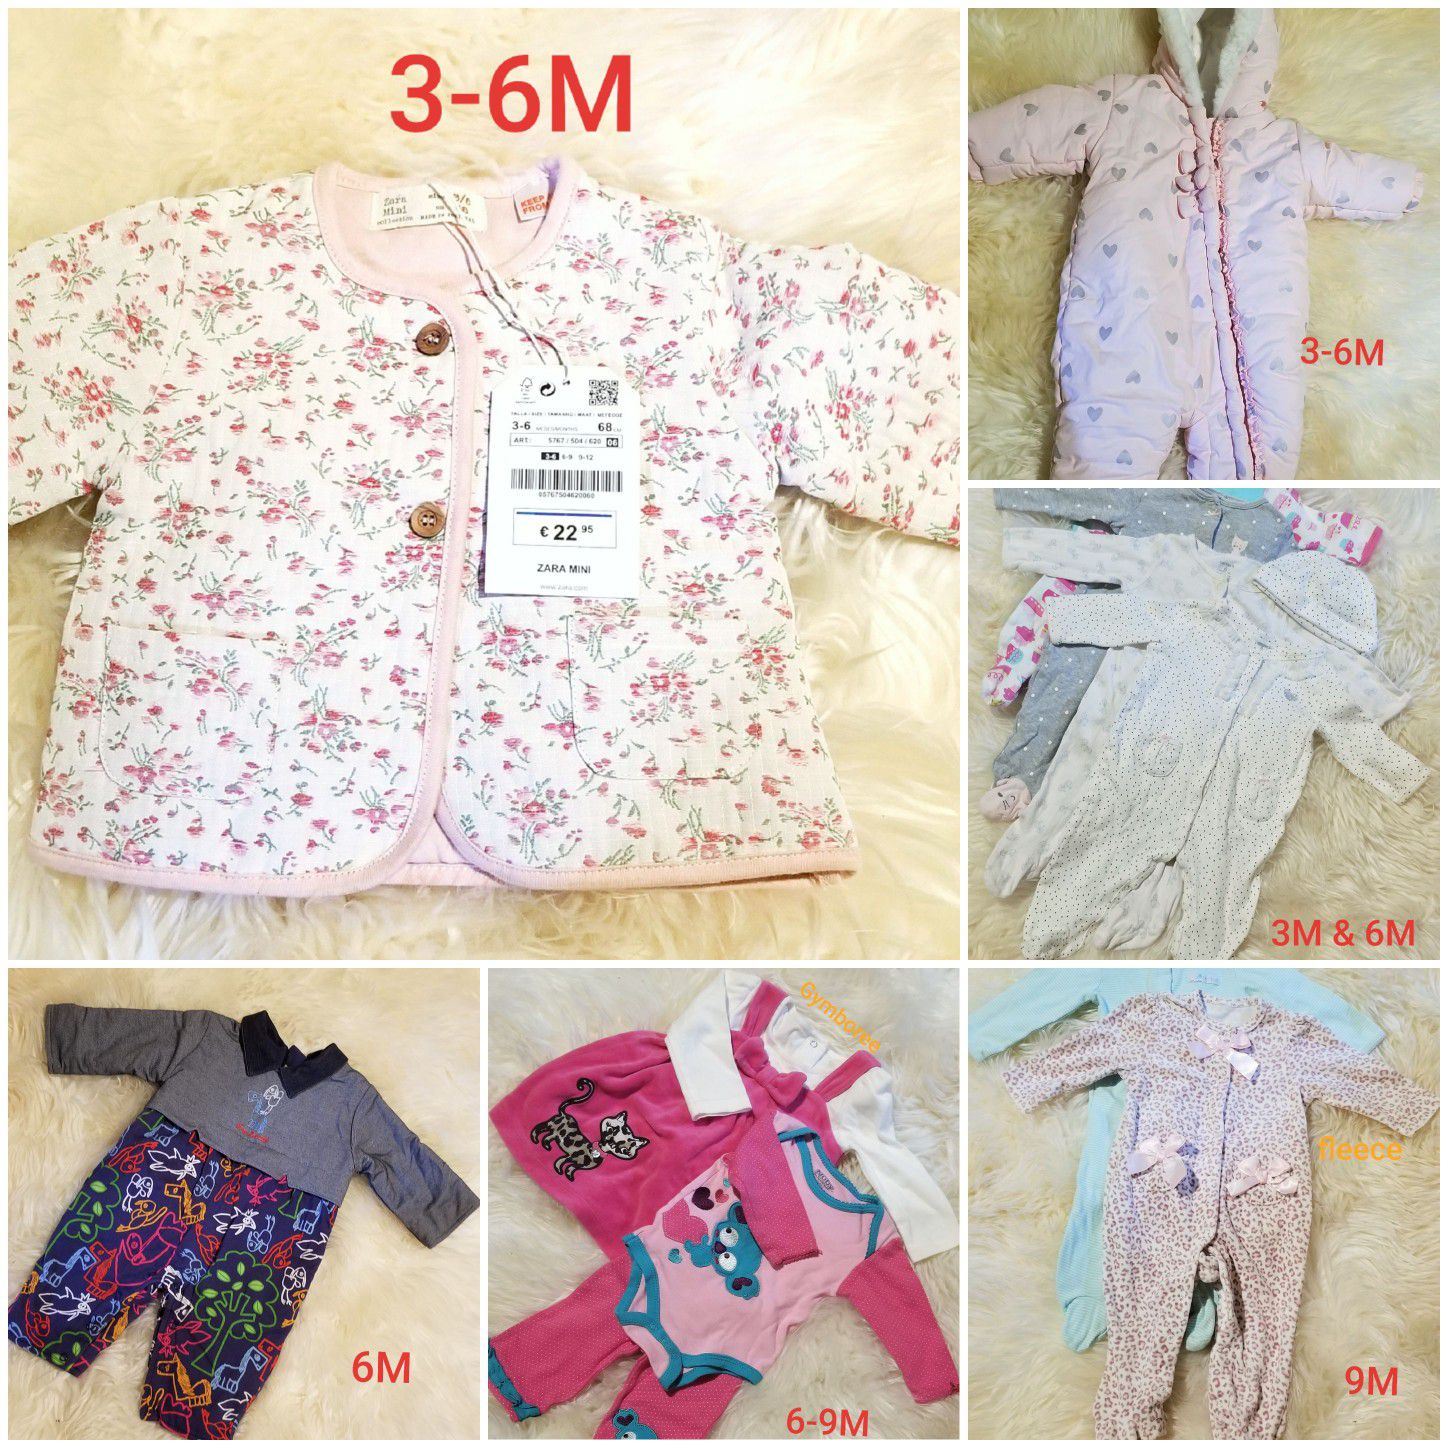 11 baby girl winter clothes and snowsuits $22